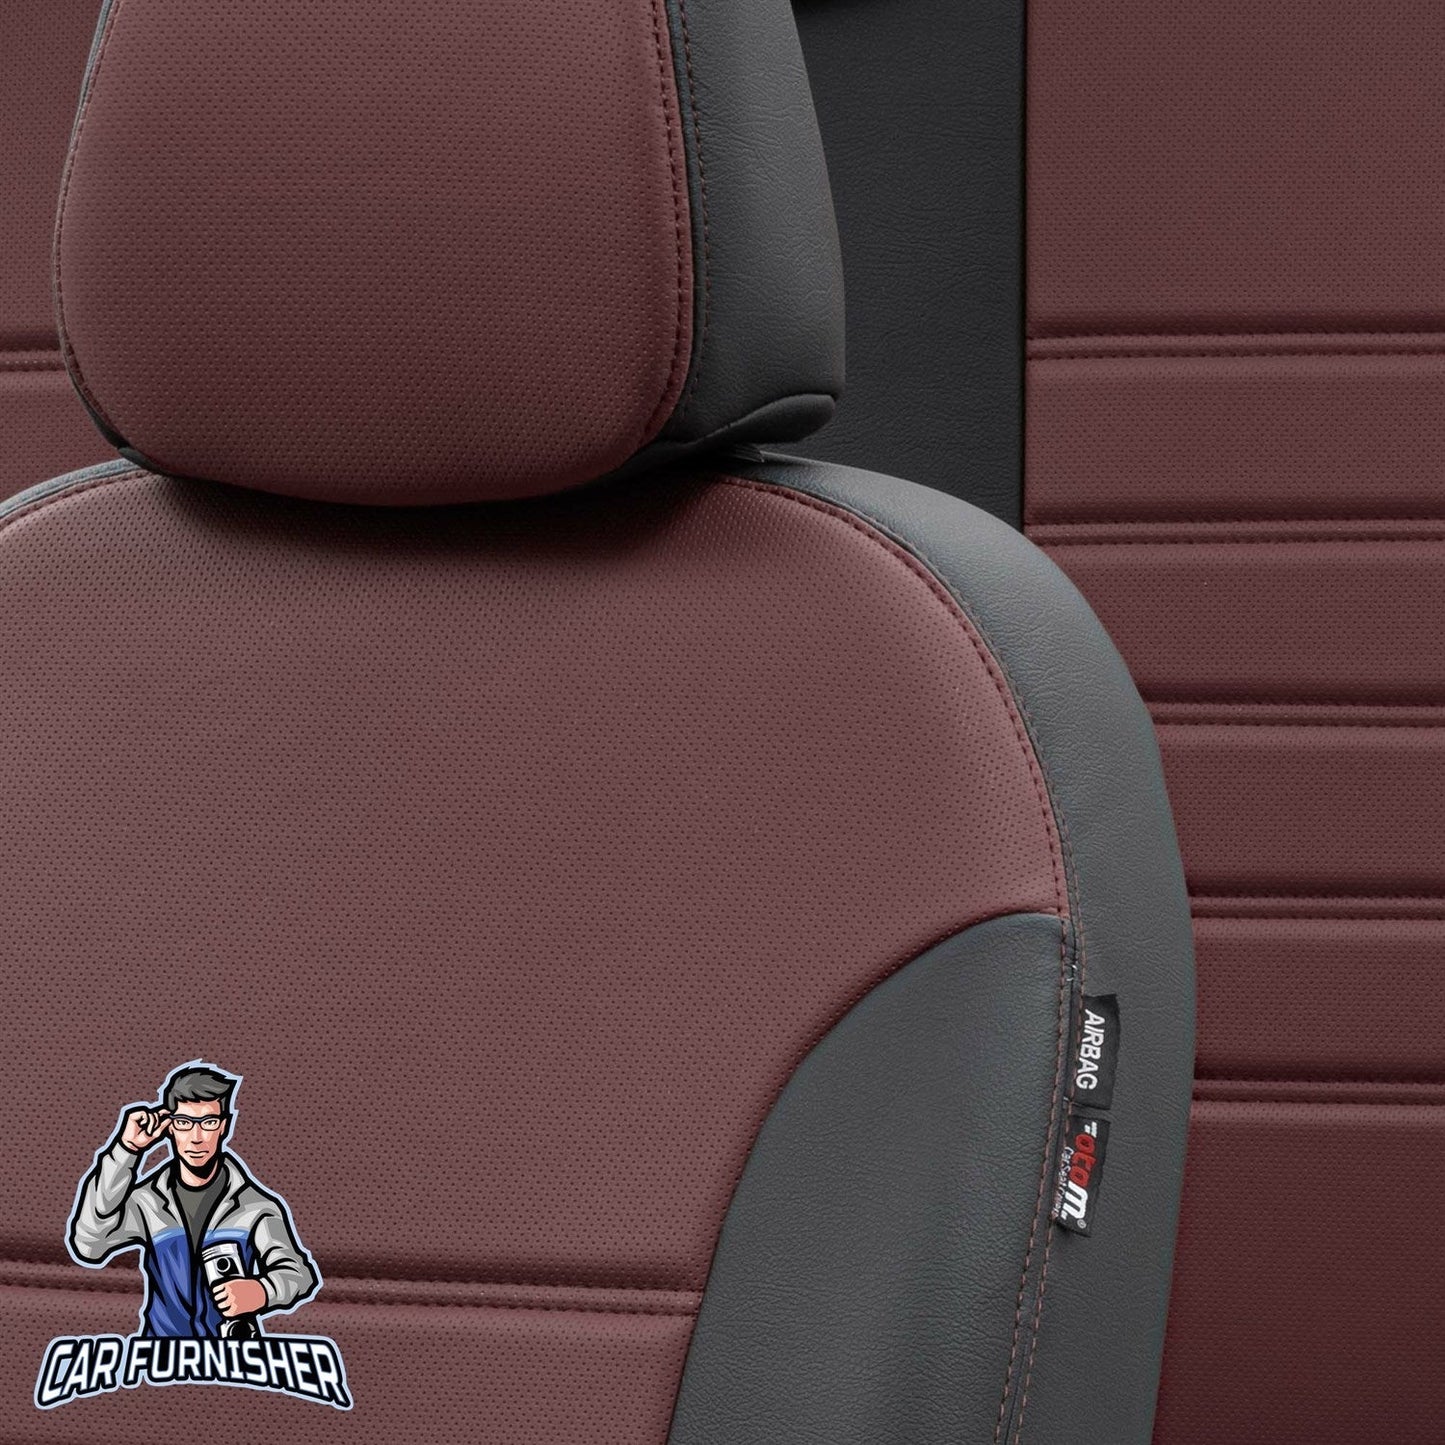 Honda HRV Seat Covers Istanbul Leather Design Burgundy Leather